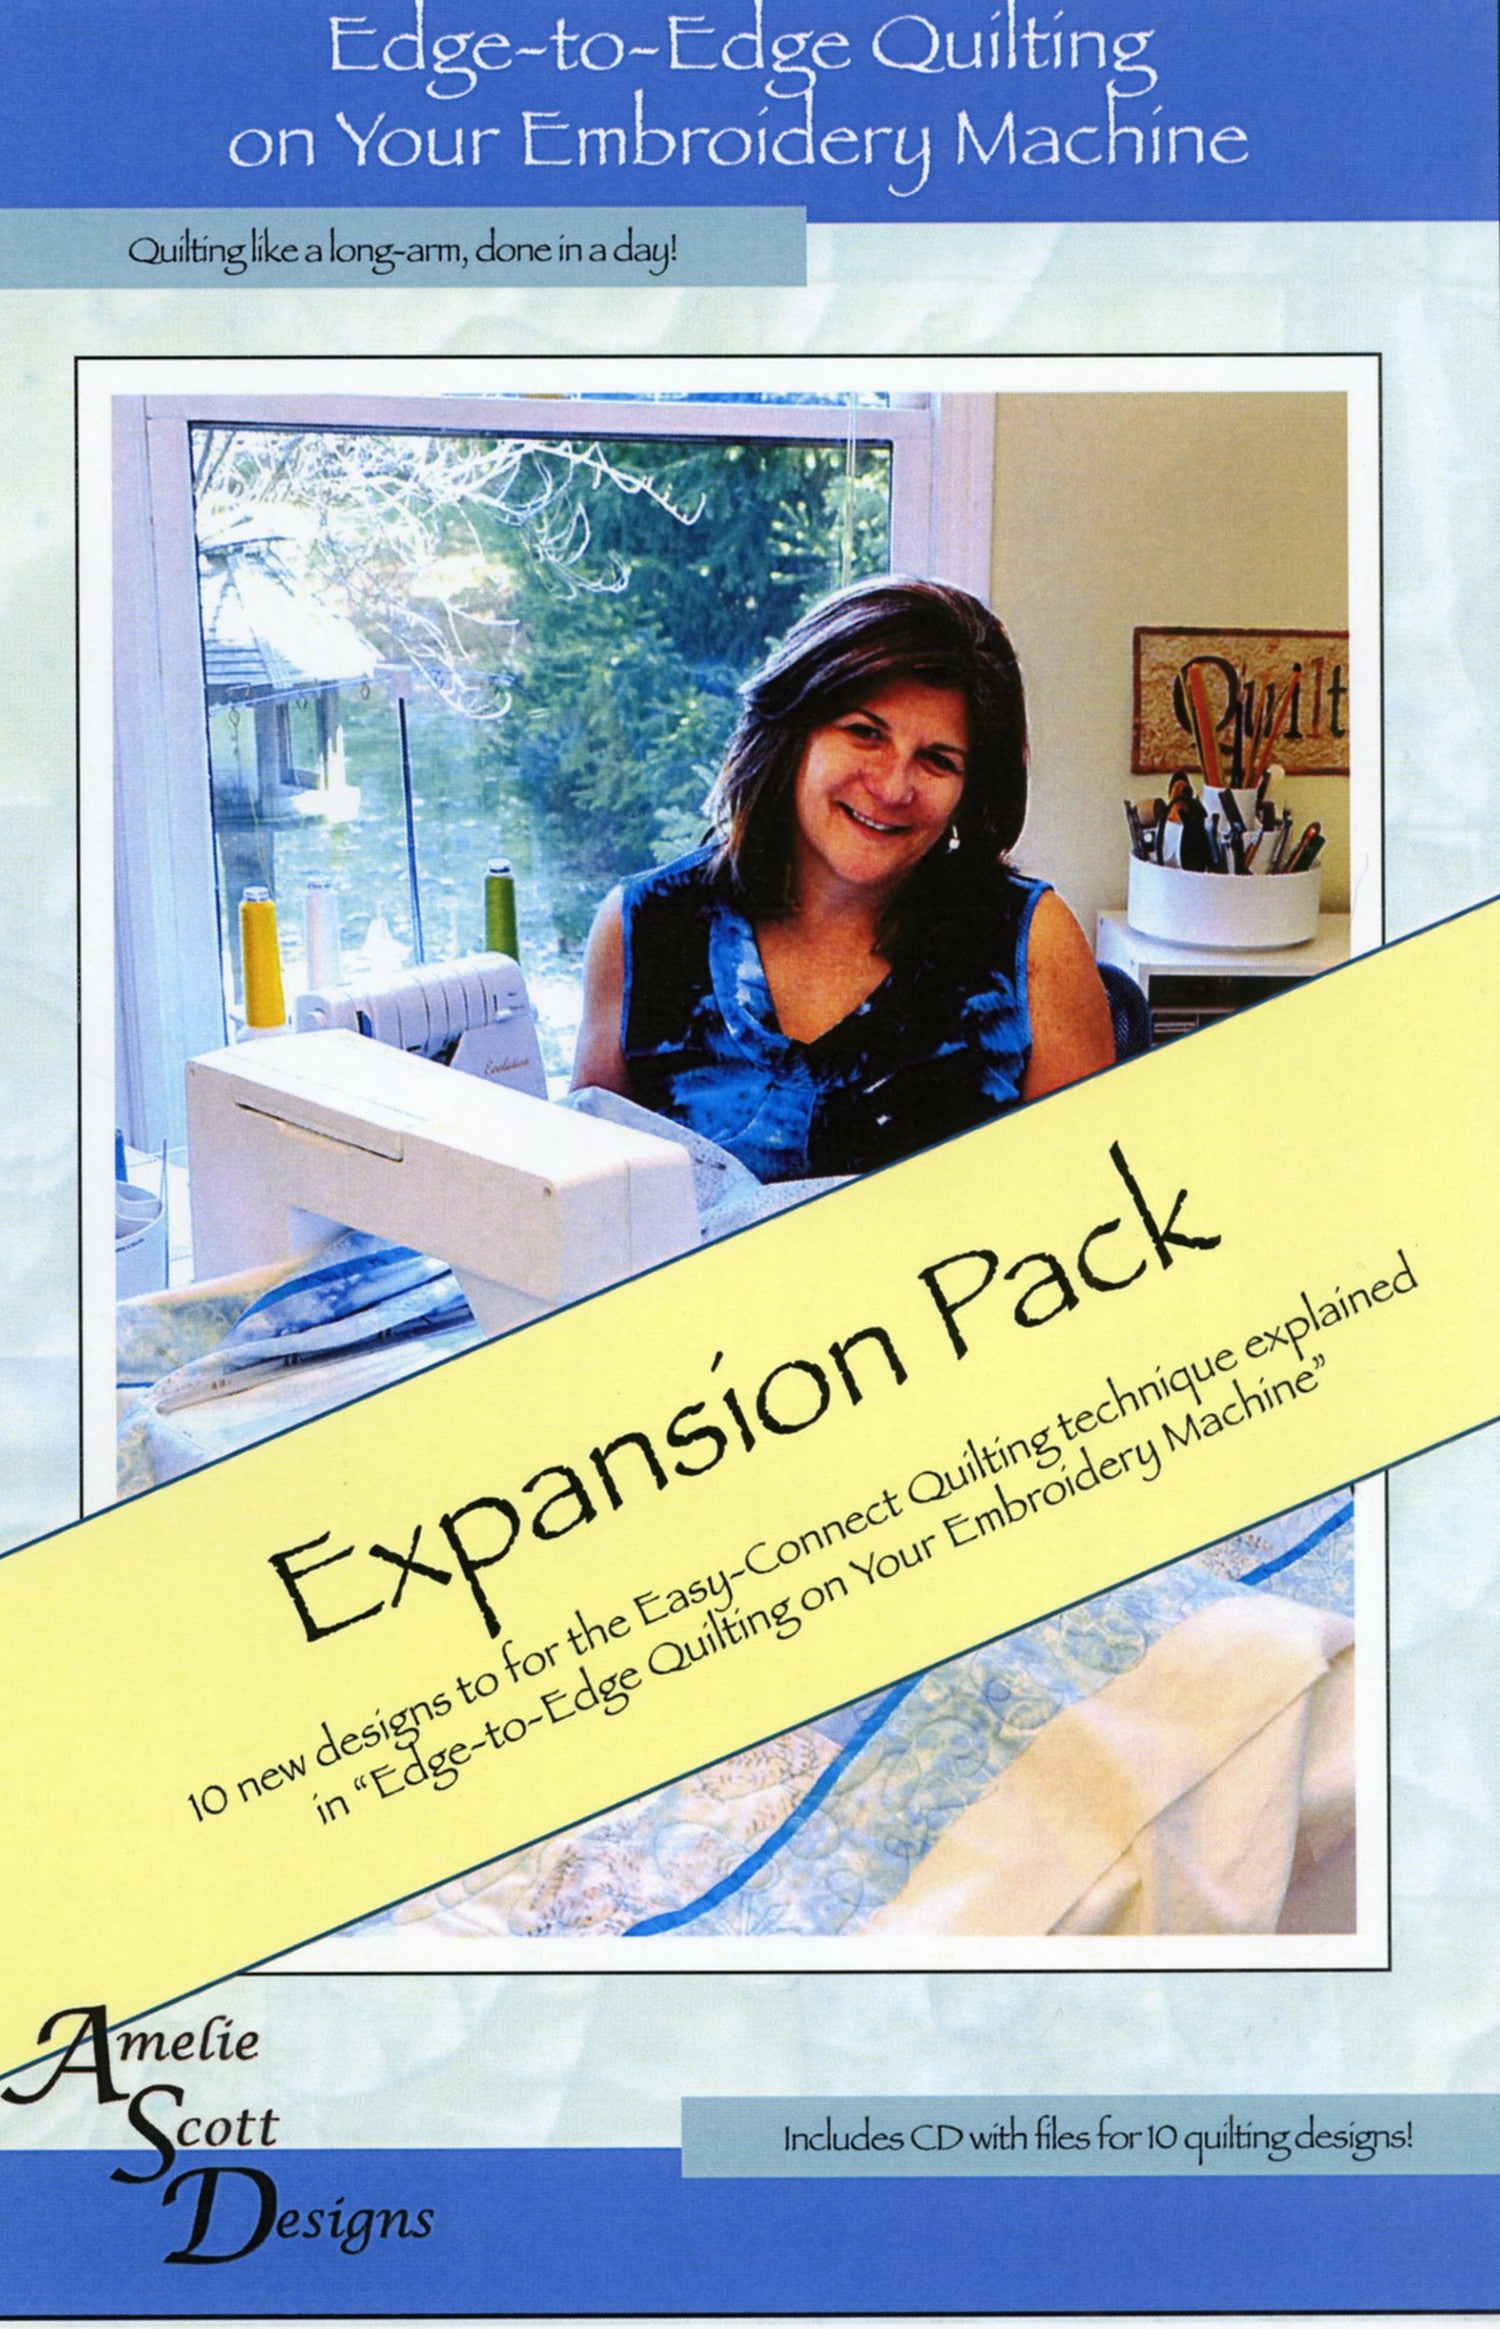 Edge-To-Edge Quilting On Your Embroidery Machine Expansion Pack 1 by Amelie Scott Designs